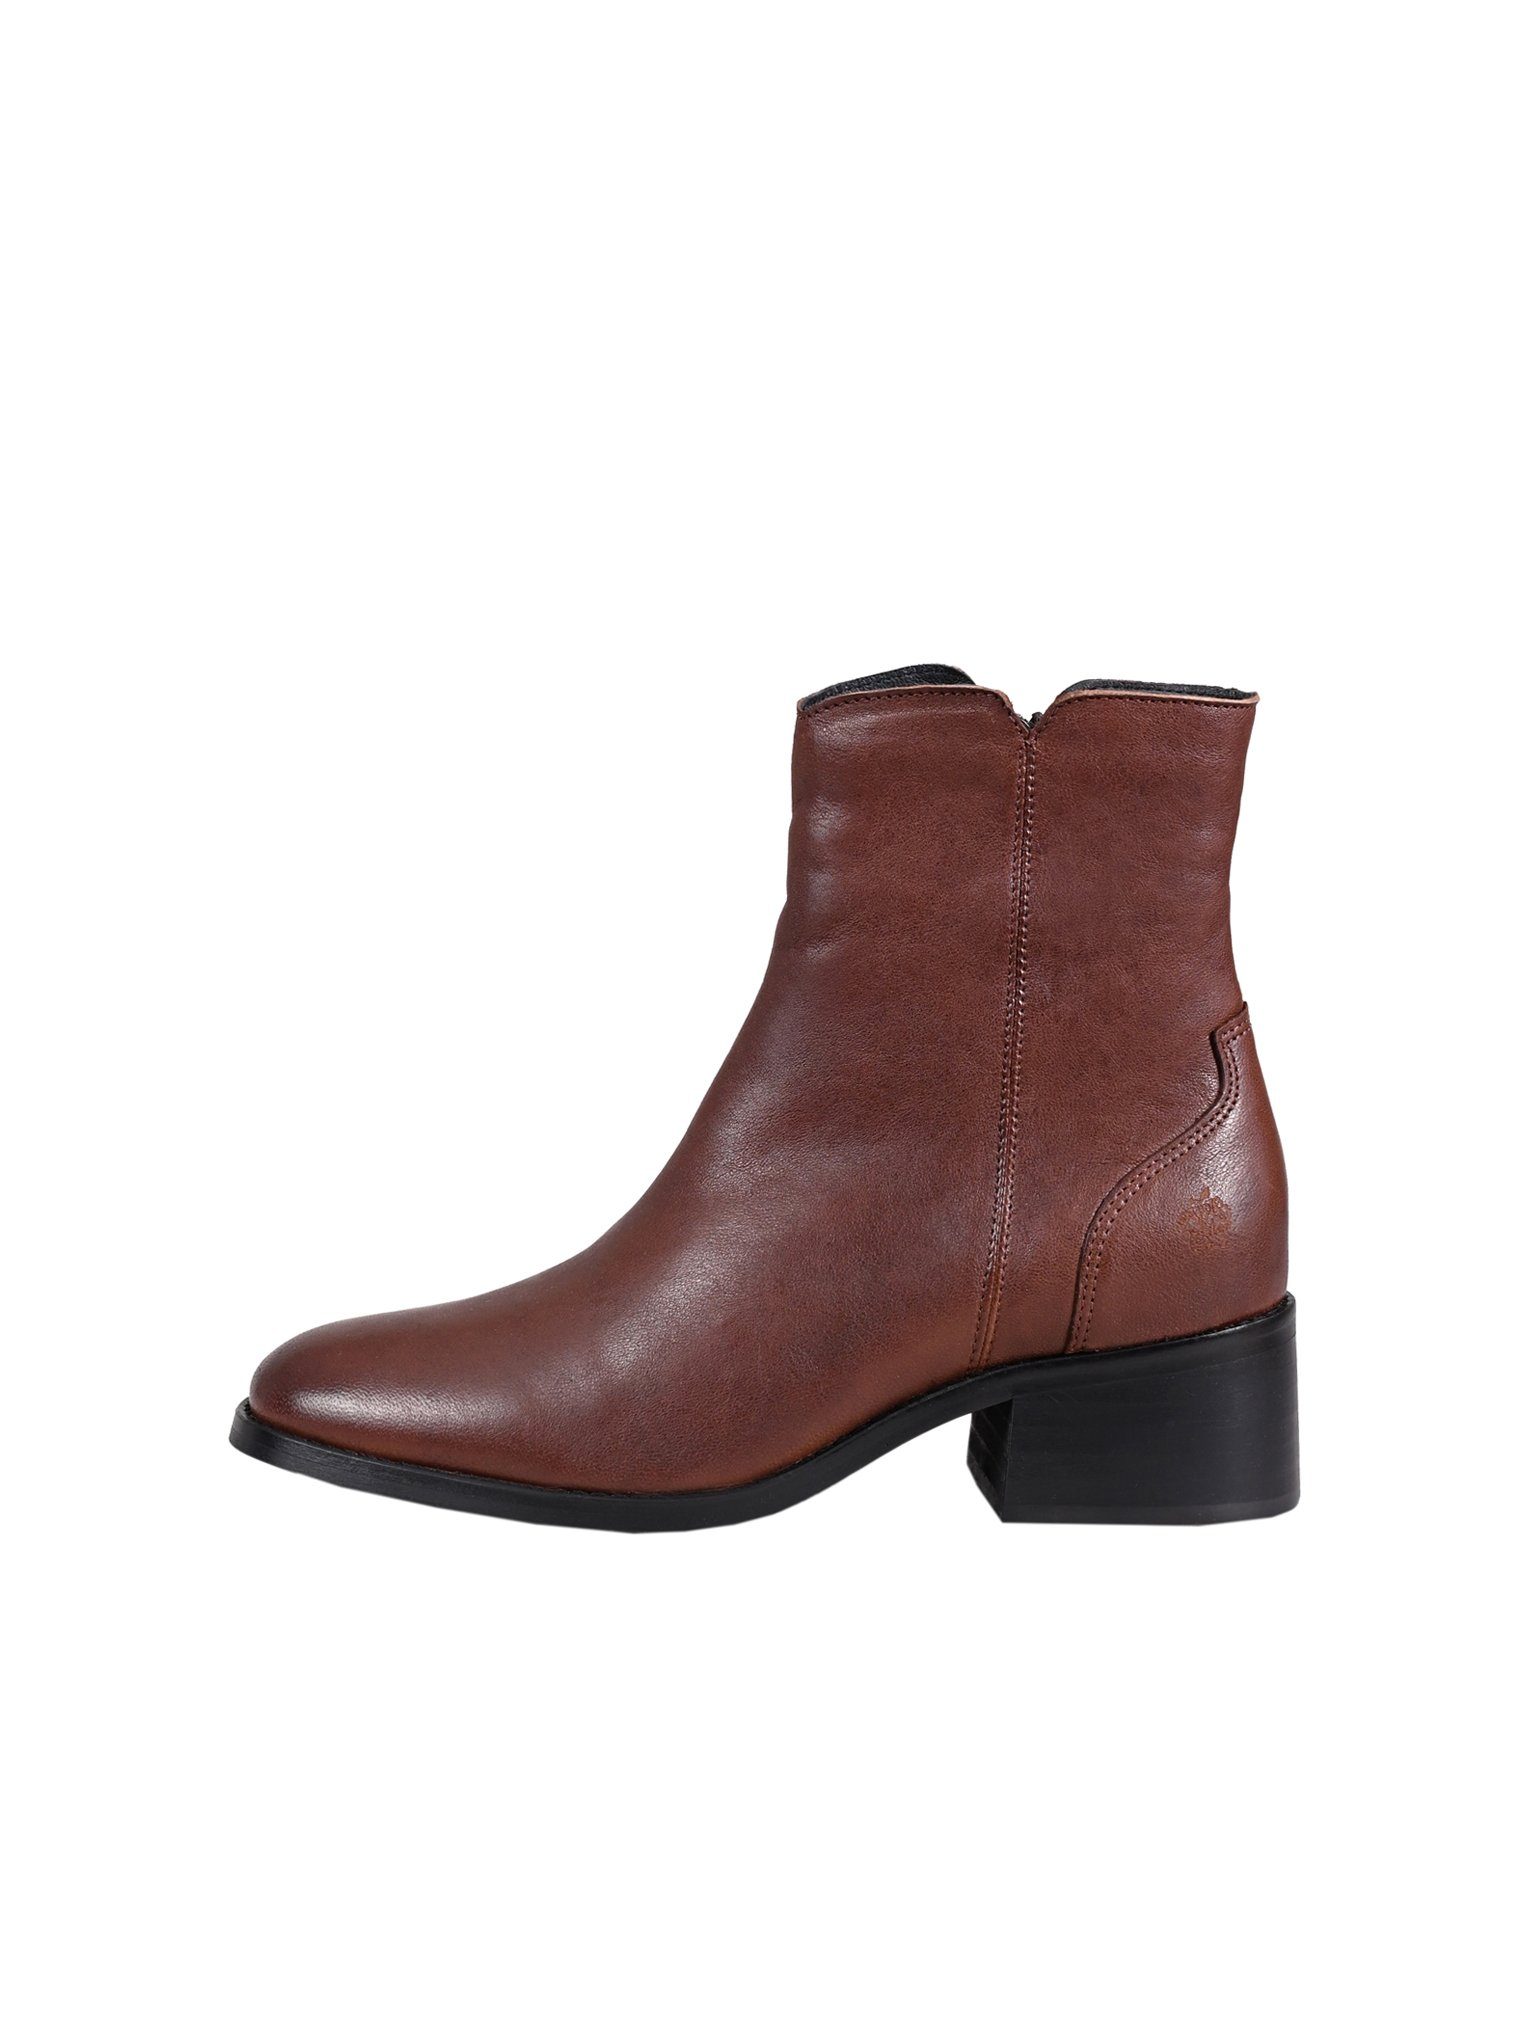 Eden Apple THEA Ankleboots of